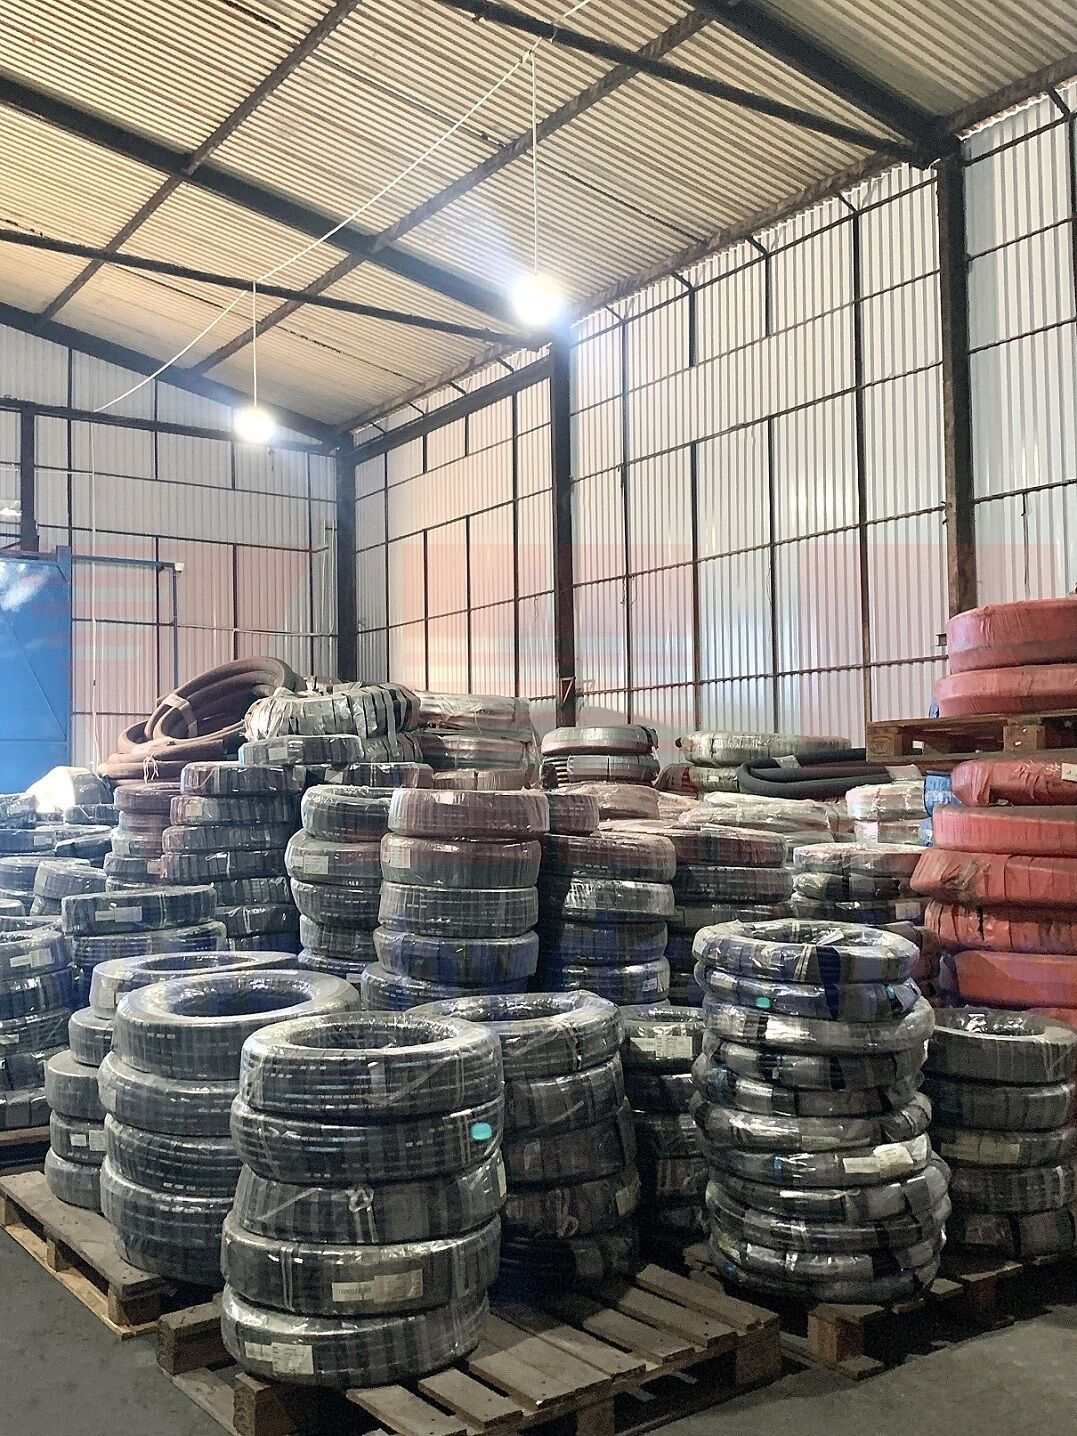 VHE's warehouse of high-quality hydraulic hose at cheap prices